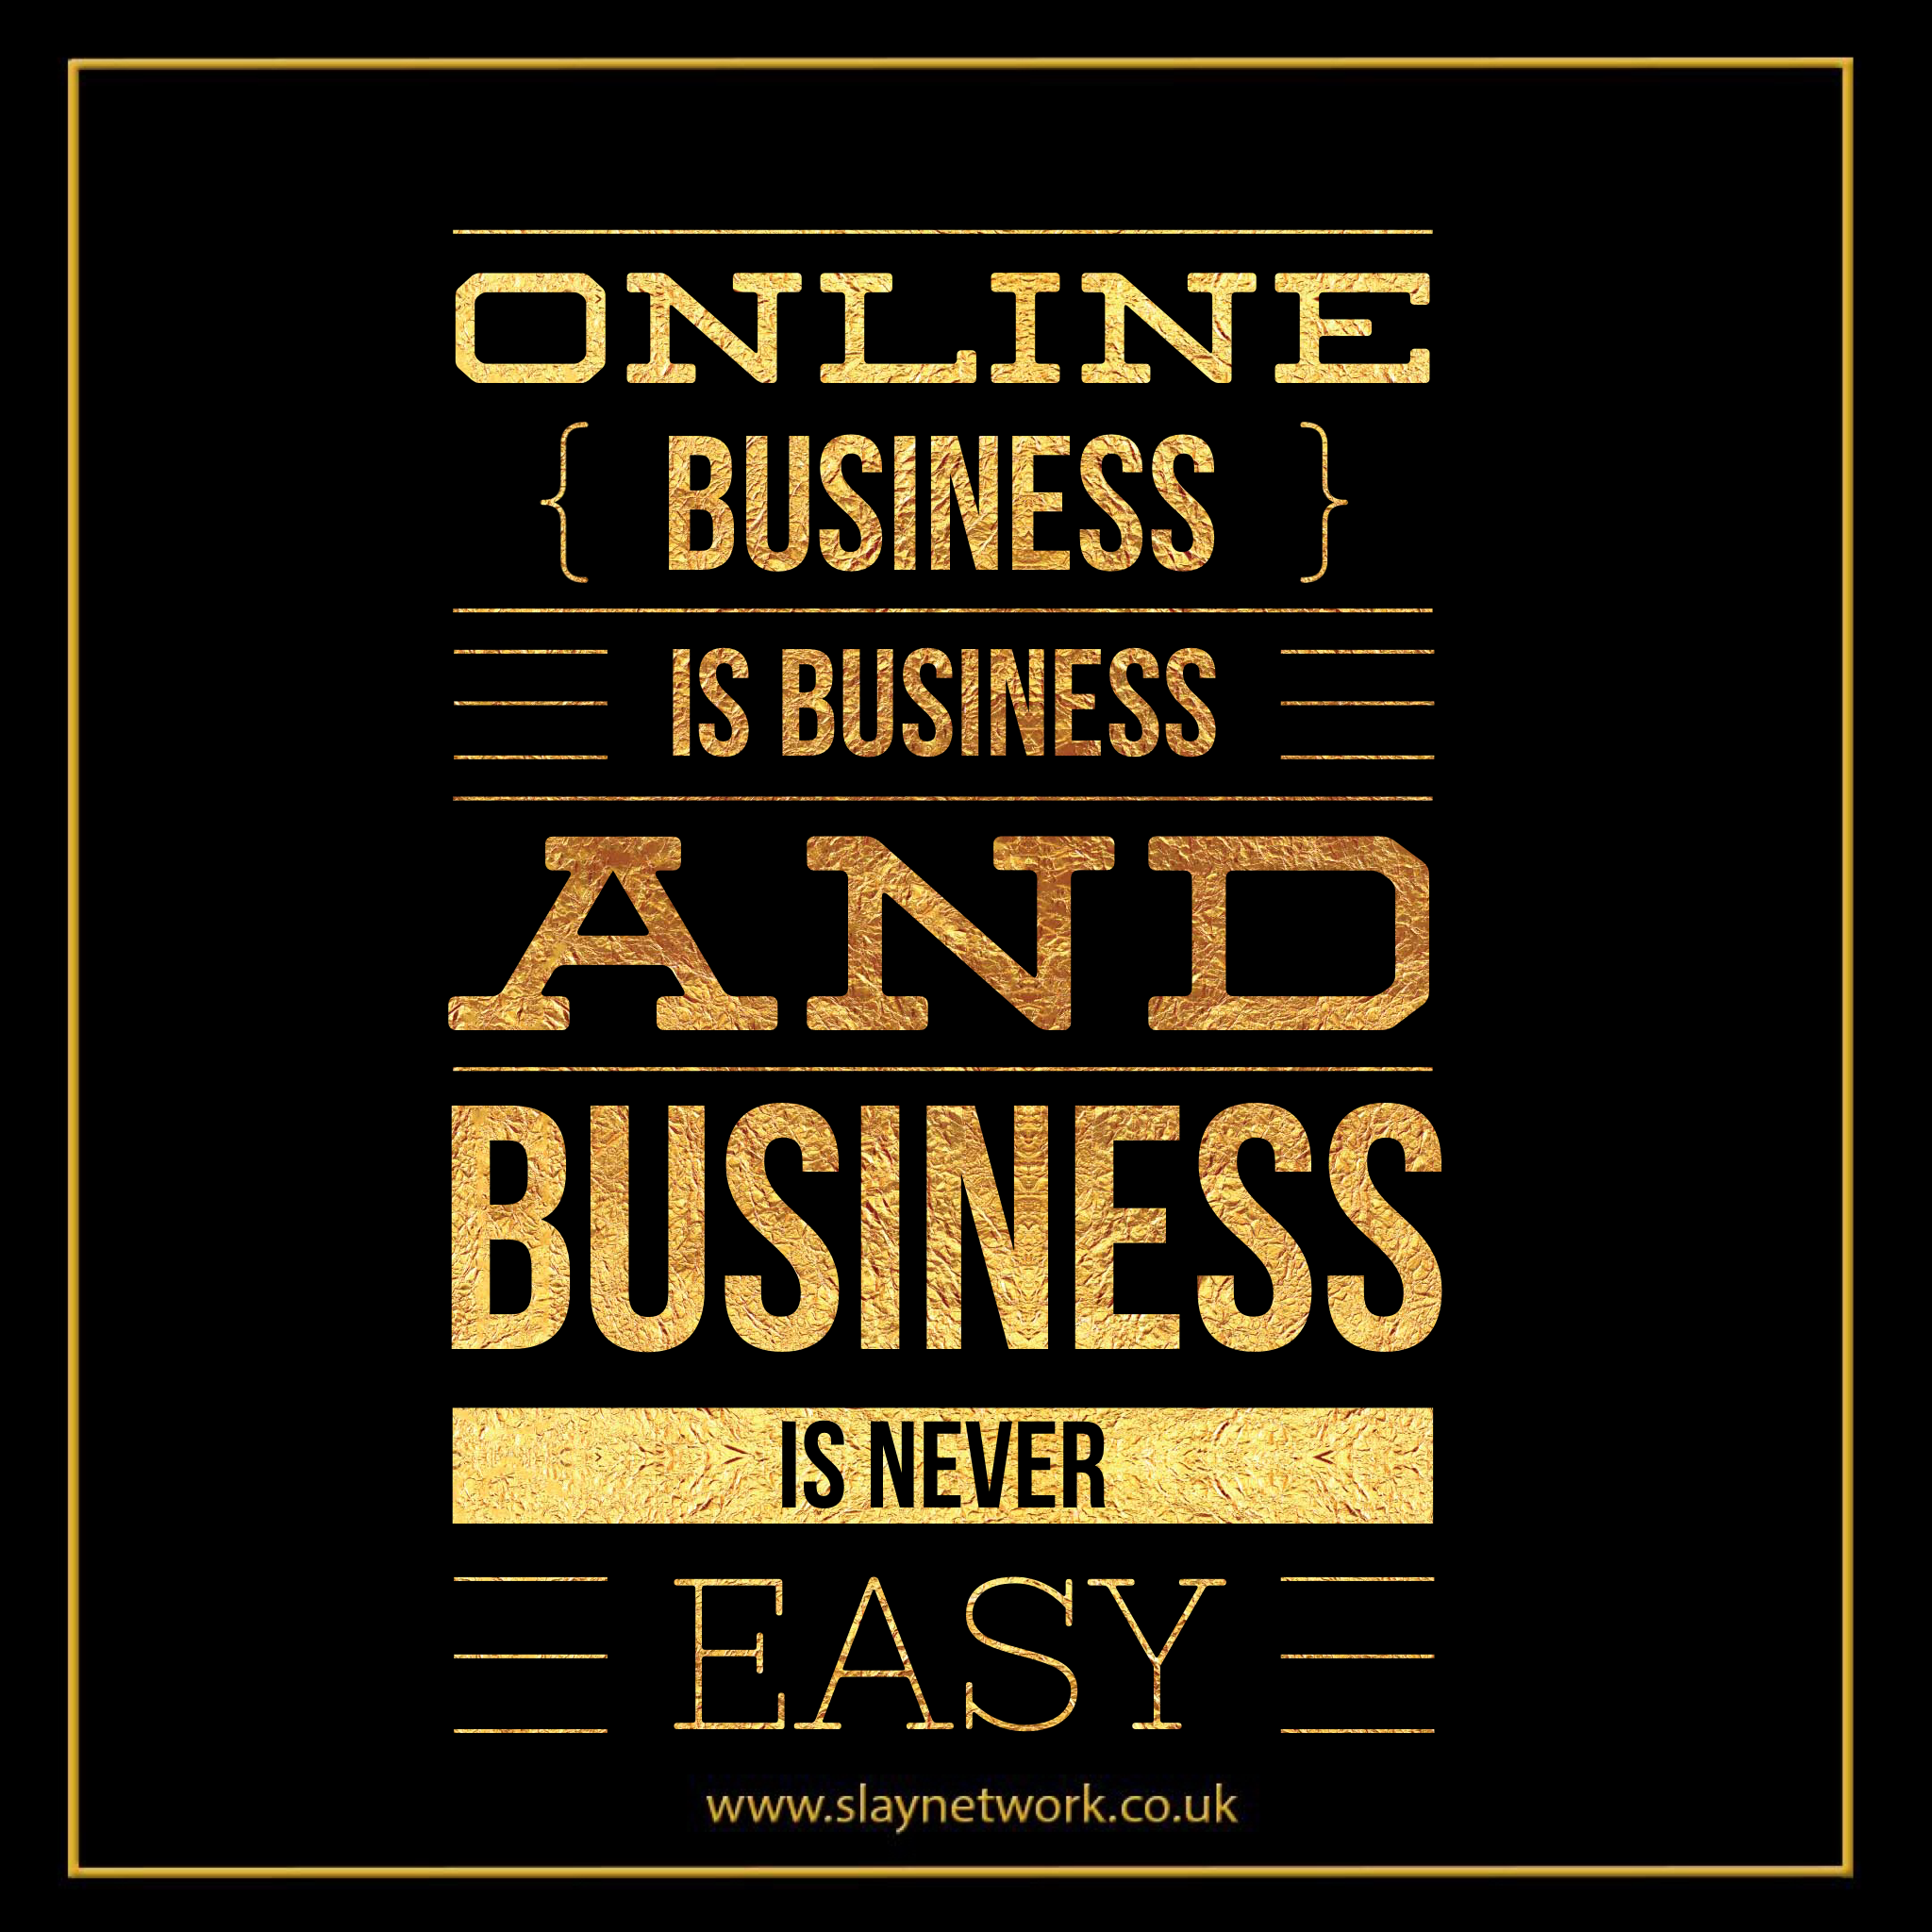 about Online Business